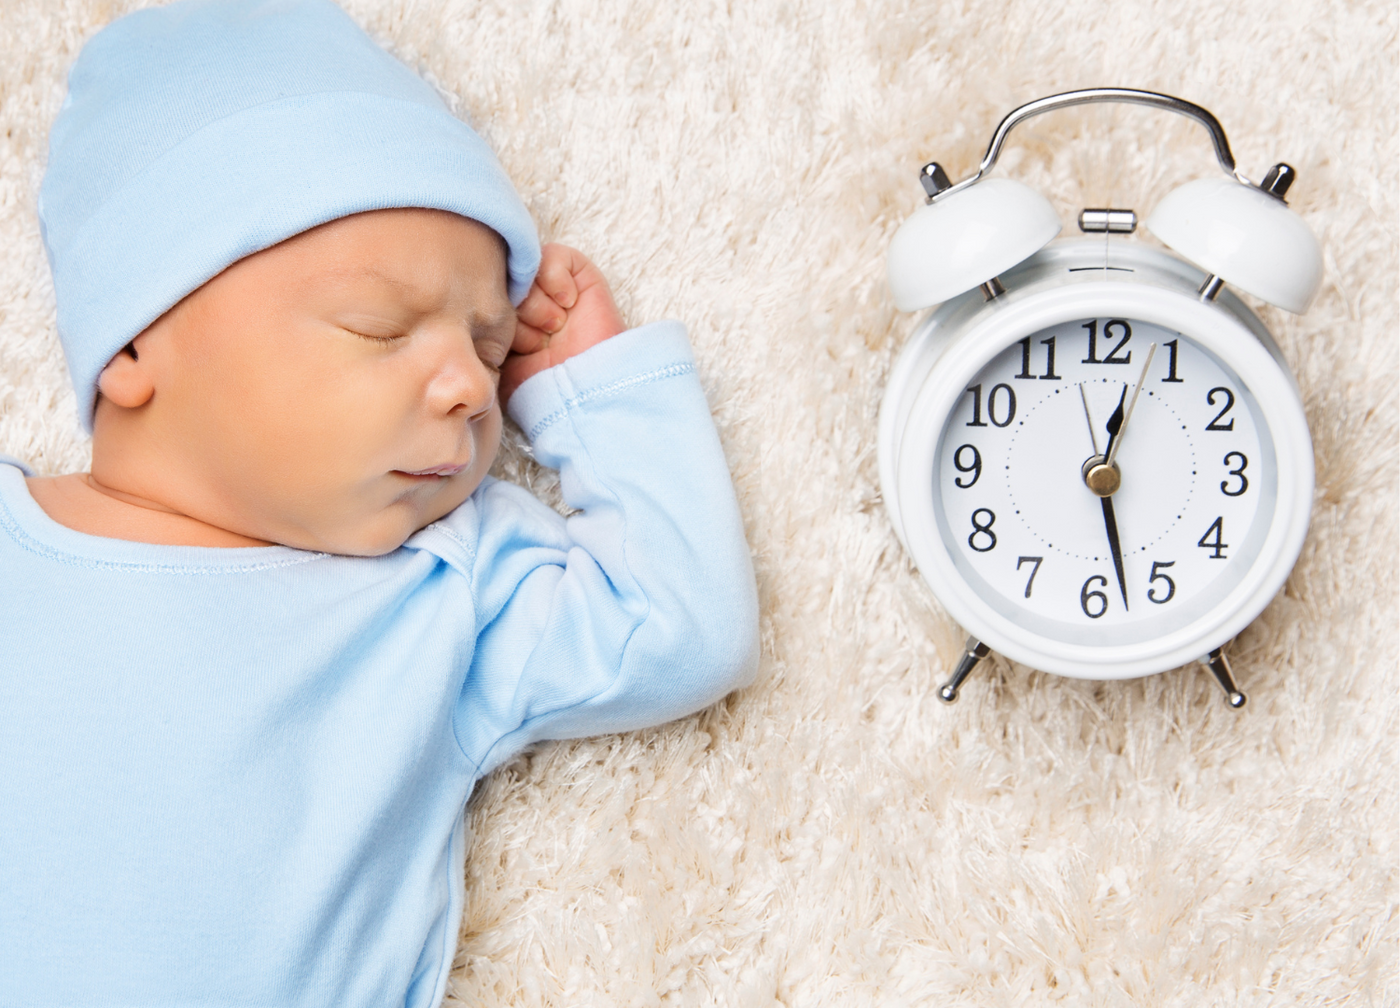 When the clocks ‘spring forward’ into spring, and you have a baby, here’s how to deal with the lack of sleep